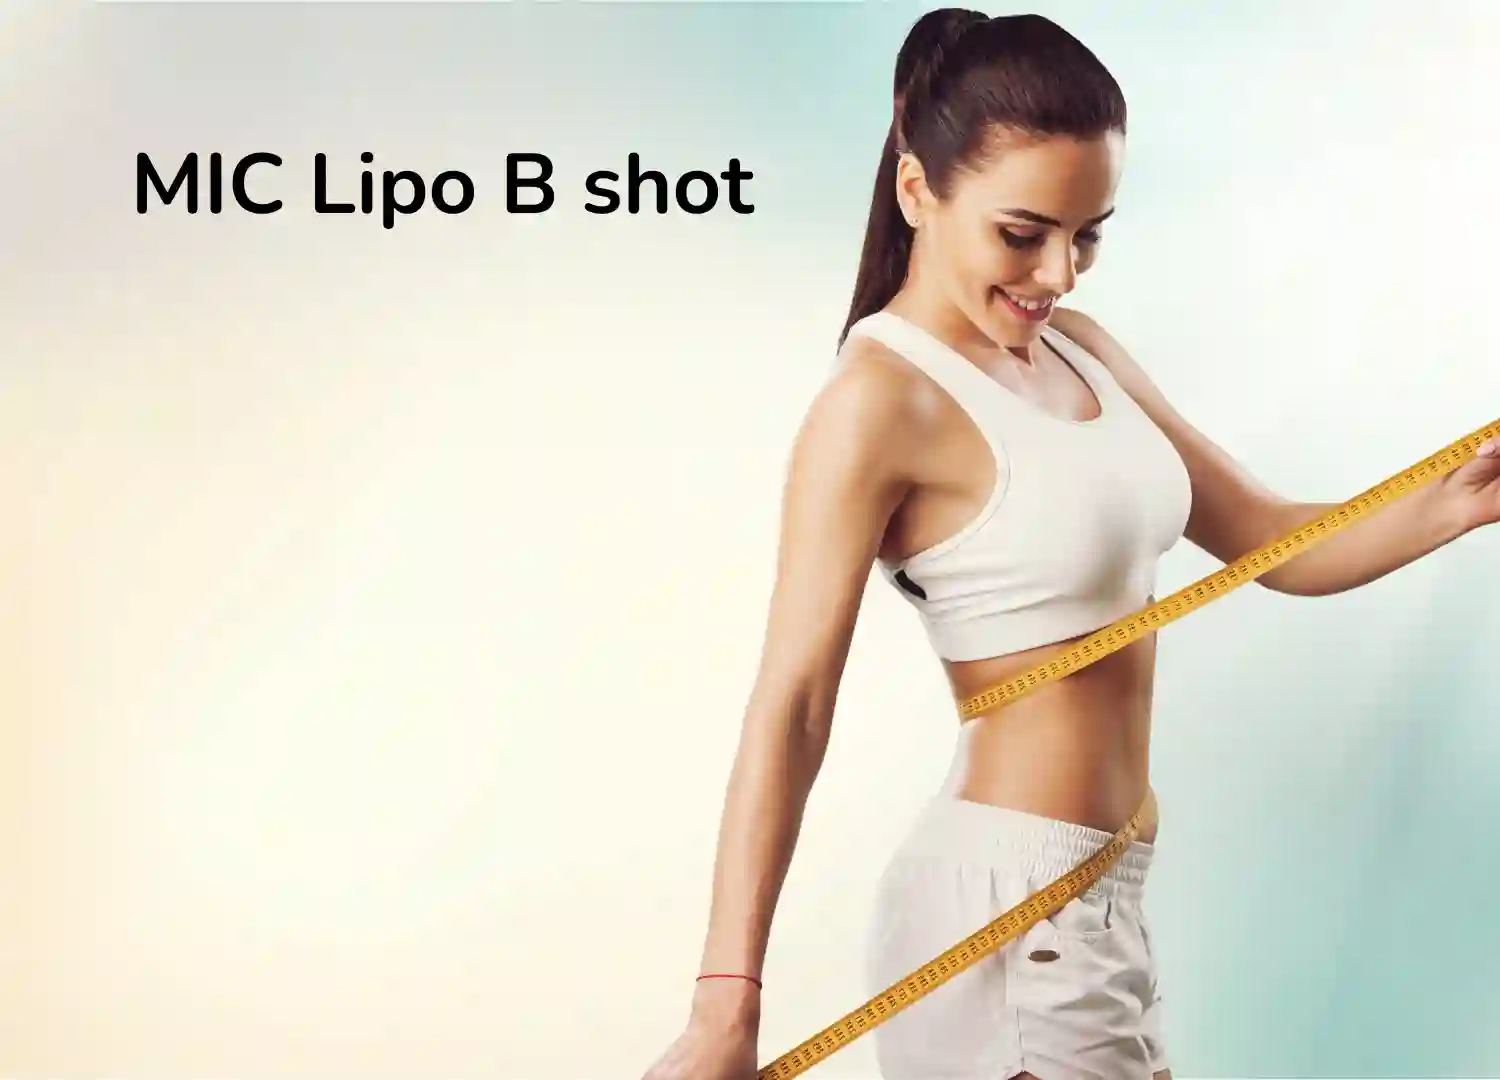 MIC Lipo B shot vial - a targeted solution for weight management.